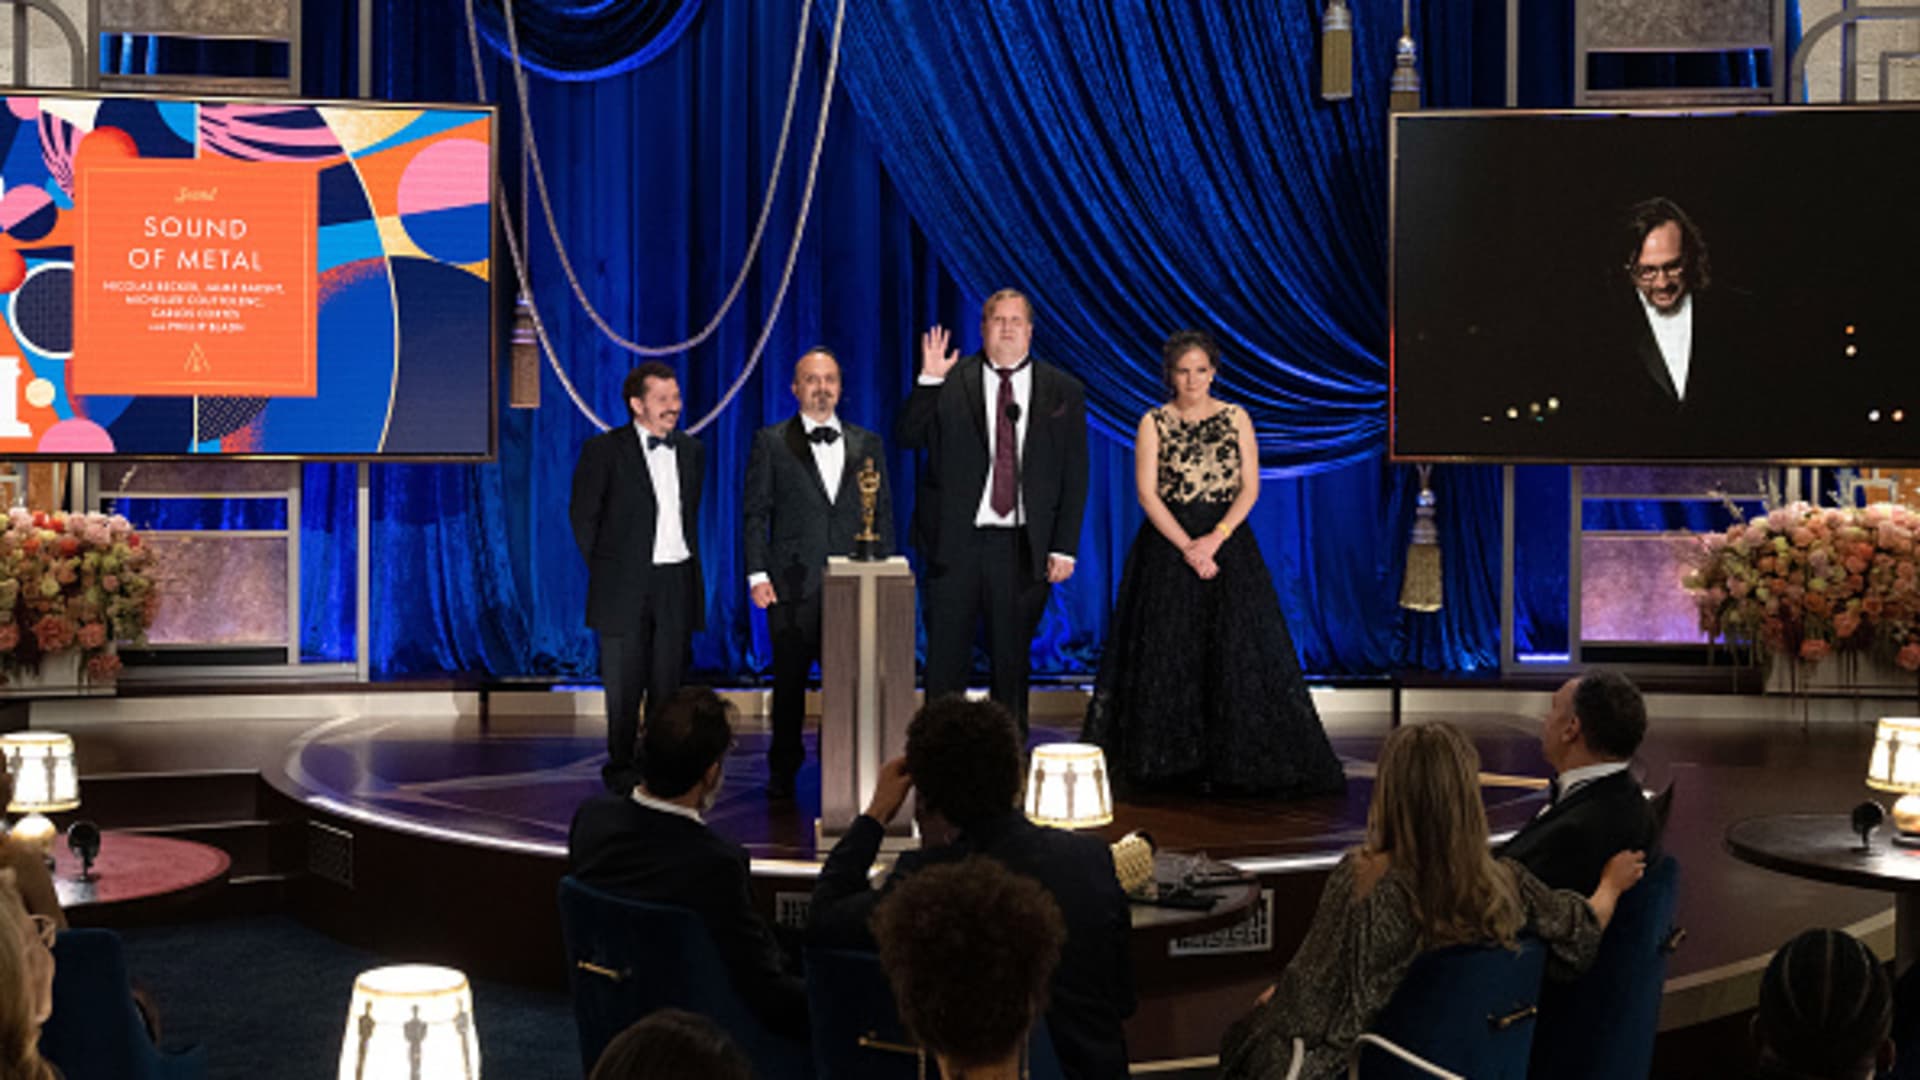 In this handout photo provided by A.M.P.A.S., (L-R) Carlos Cortés, Jaime Baksht, Phillip Bladh and Michelle Couttolenc accept the Sound award for 'Sound of Metal' onstage during the 93rd Annual Academy Awards at Union Station on April 25, 2021 in Los Angeles, California.